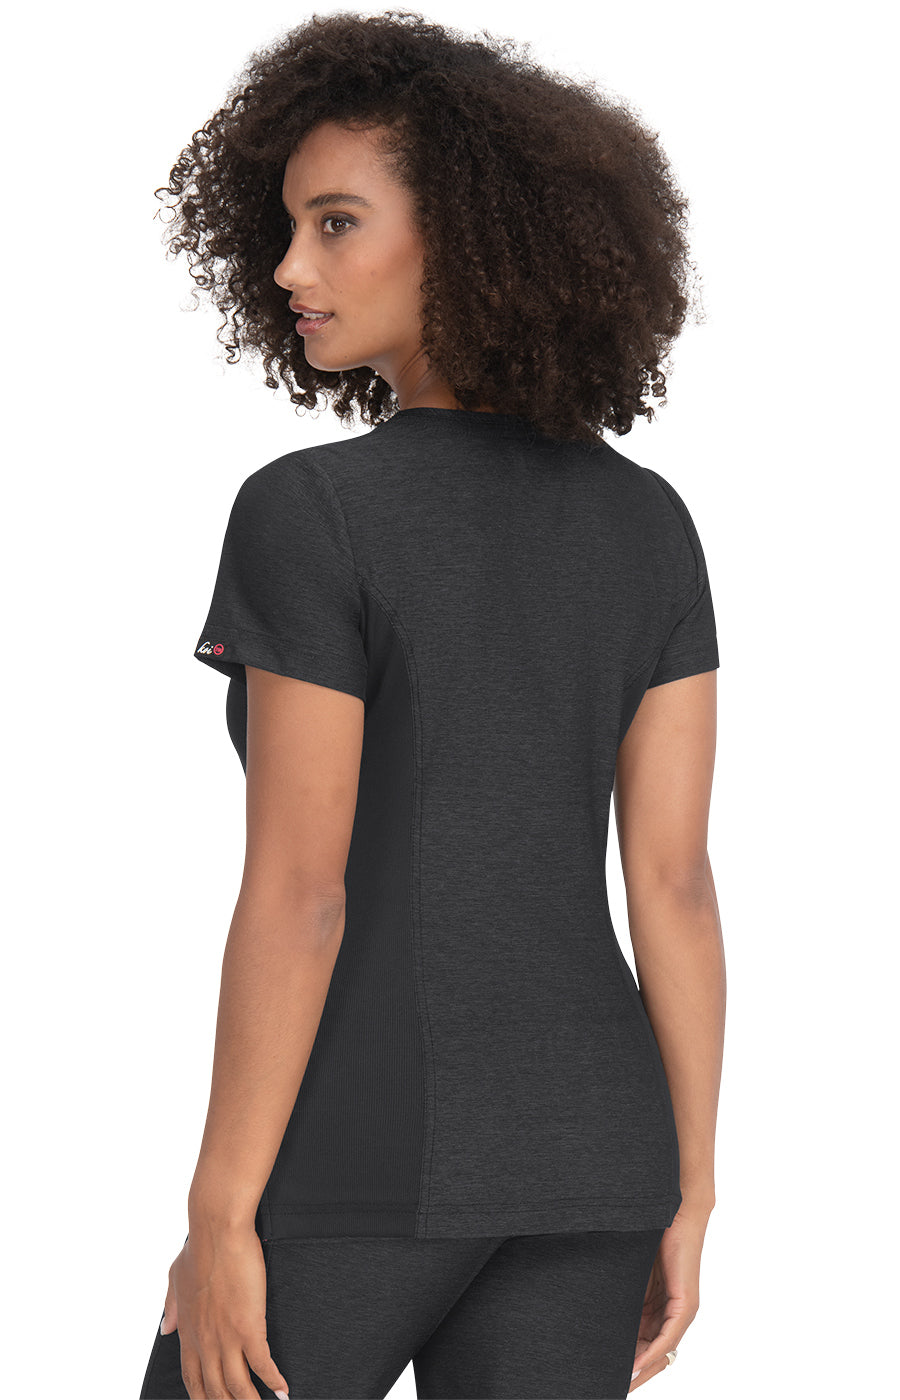 Serenity Top Heather Charcoal